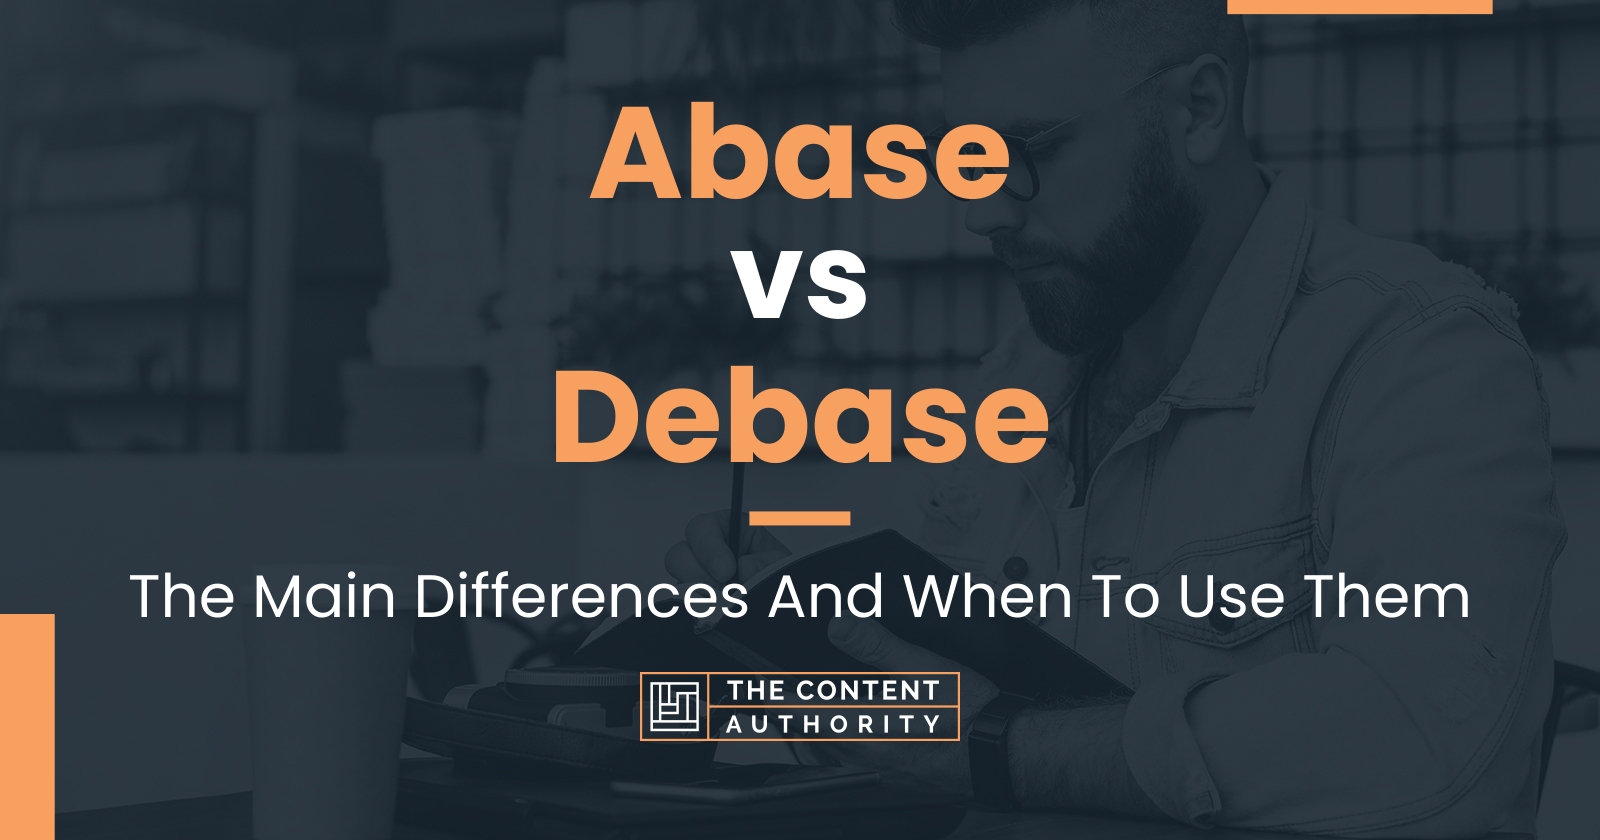 Abase vs Debase: The Main Differences And When To Use Them